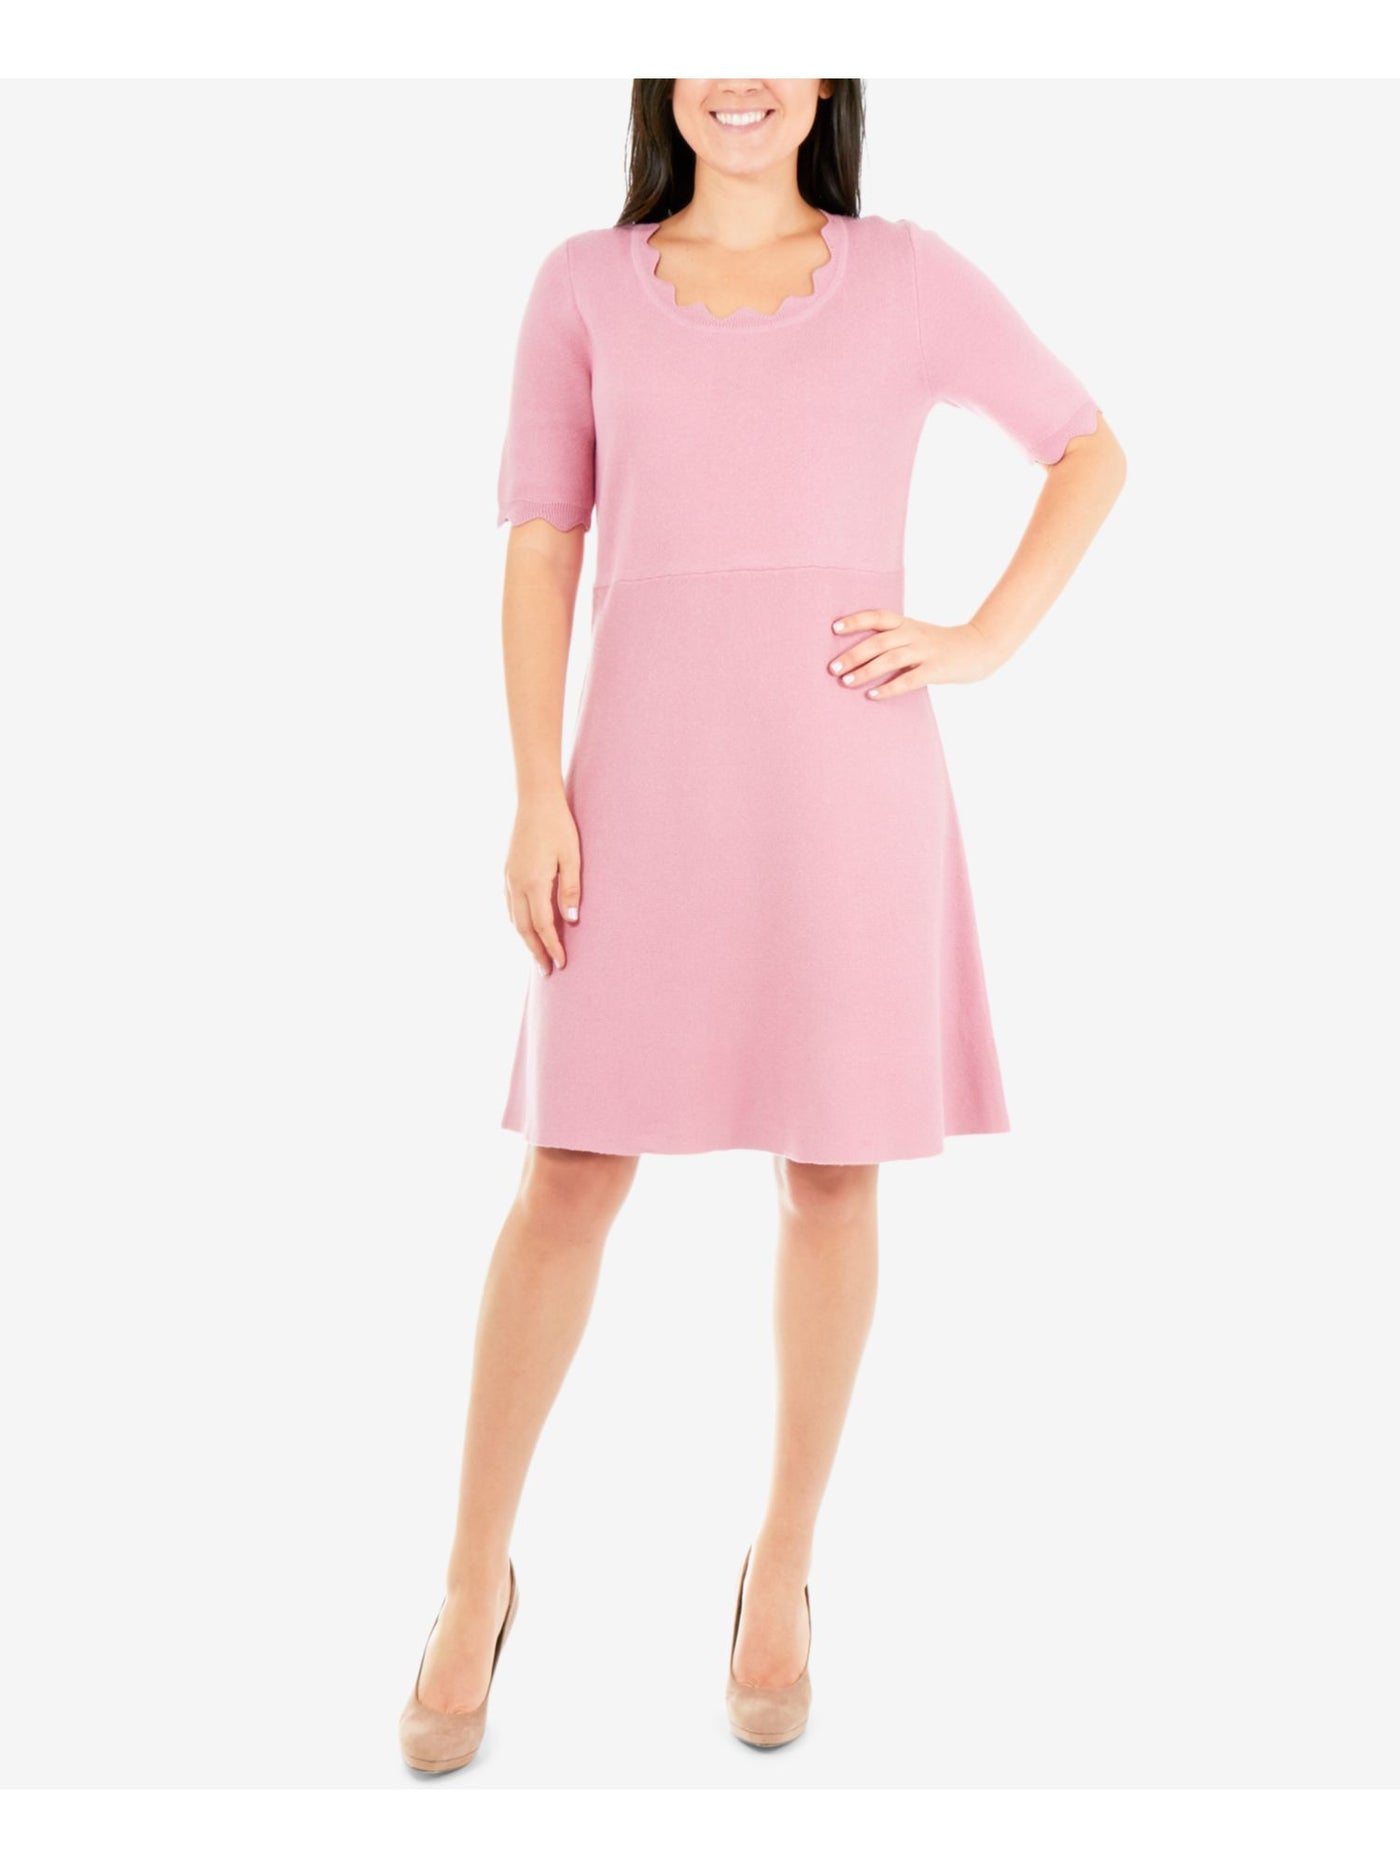 NY COLLECTION Womens Pink Scalloped Sweater Short Sleeve Scoop Neck Above The Knee Party Fit + Flare Dress Petites PS